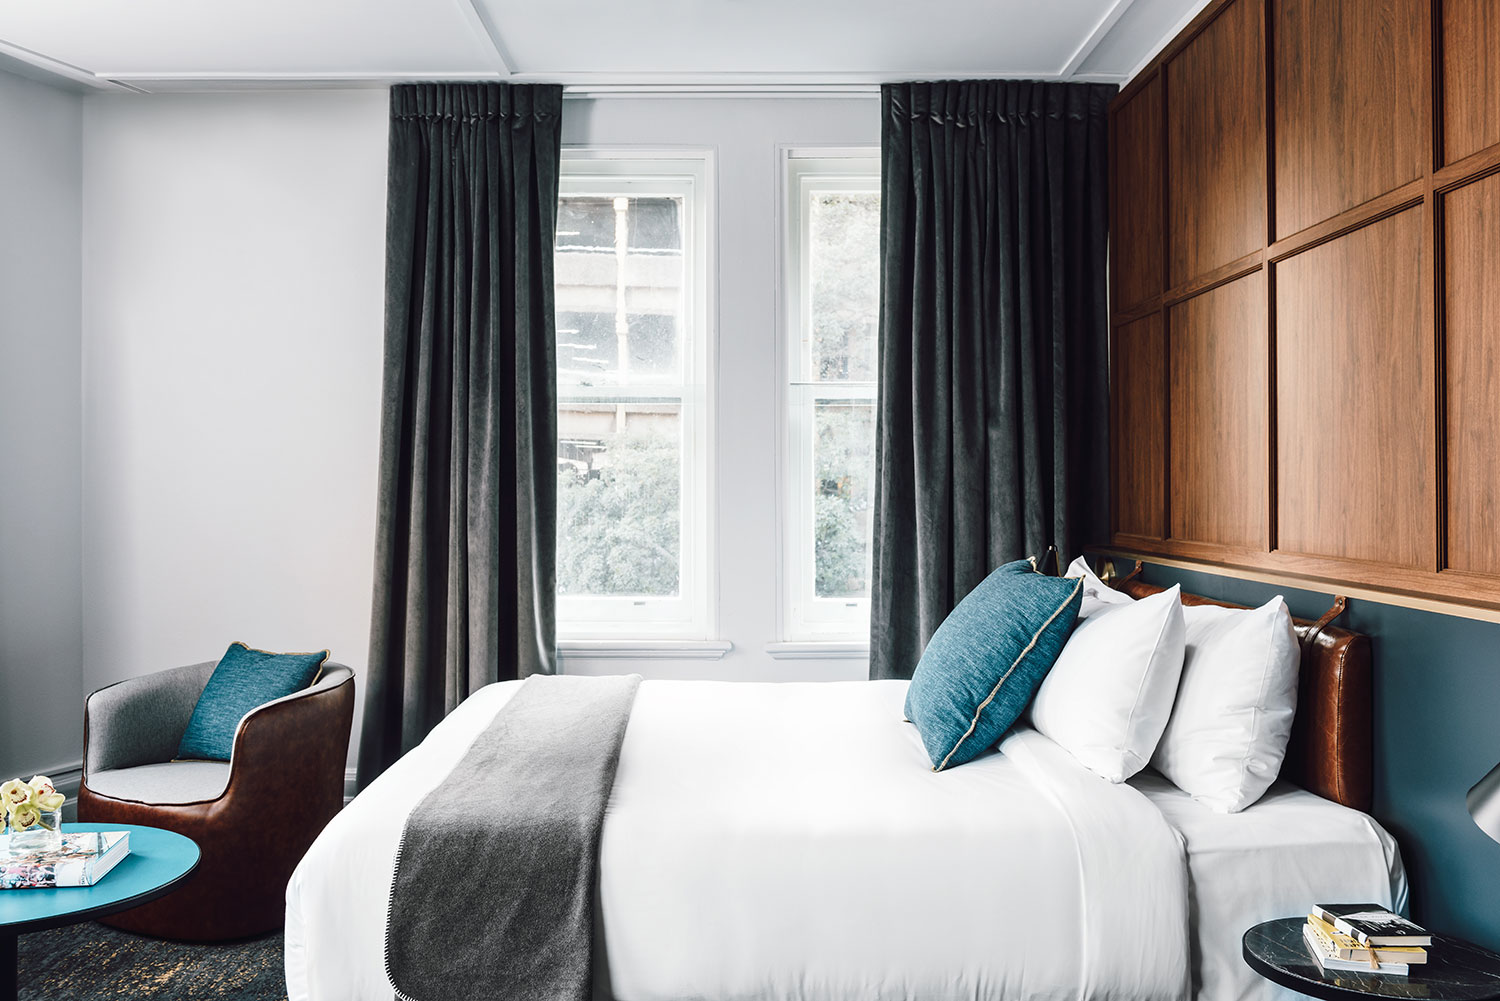 Walnut veneer wall panelling, plush bedding and retro furniture combine to make rooms elegant and appealing